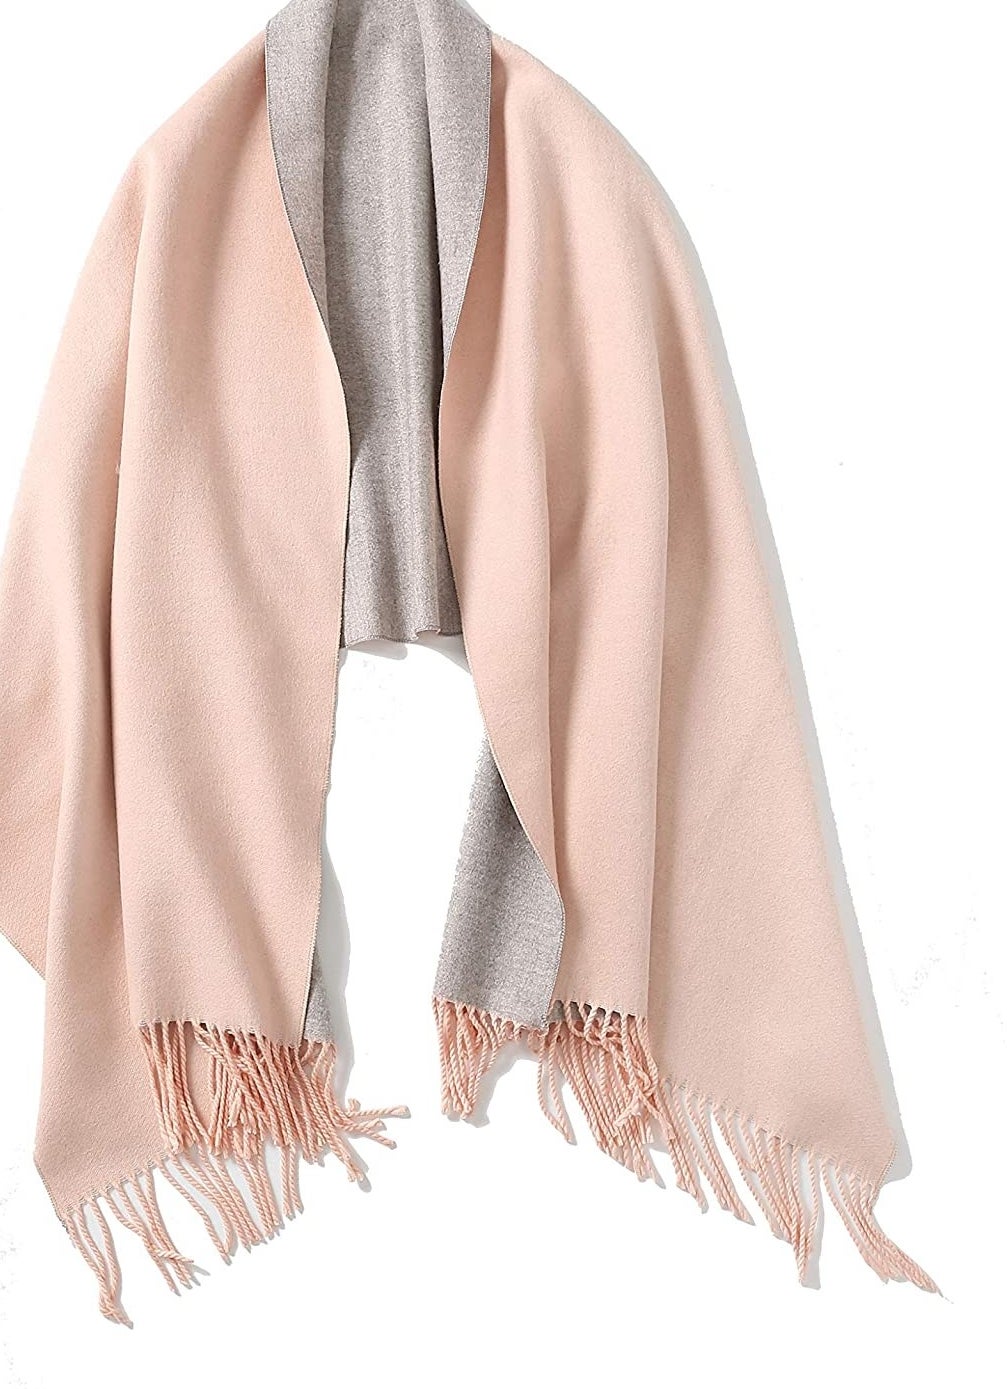 The scarf in pink gray